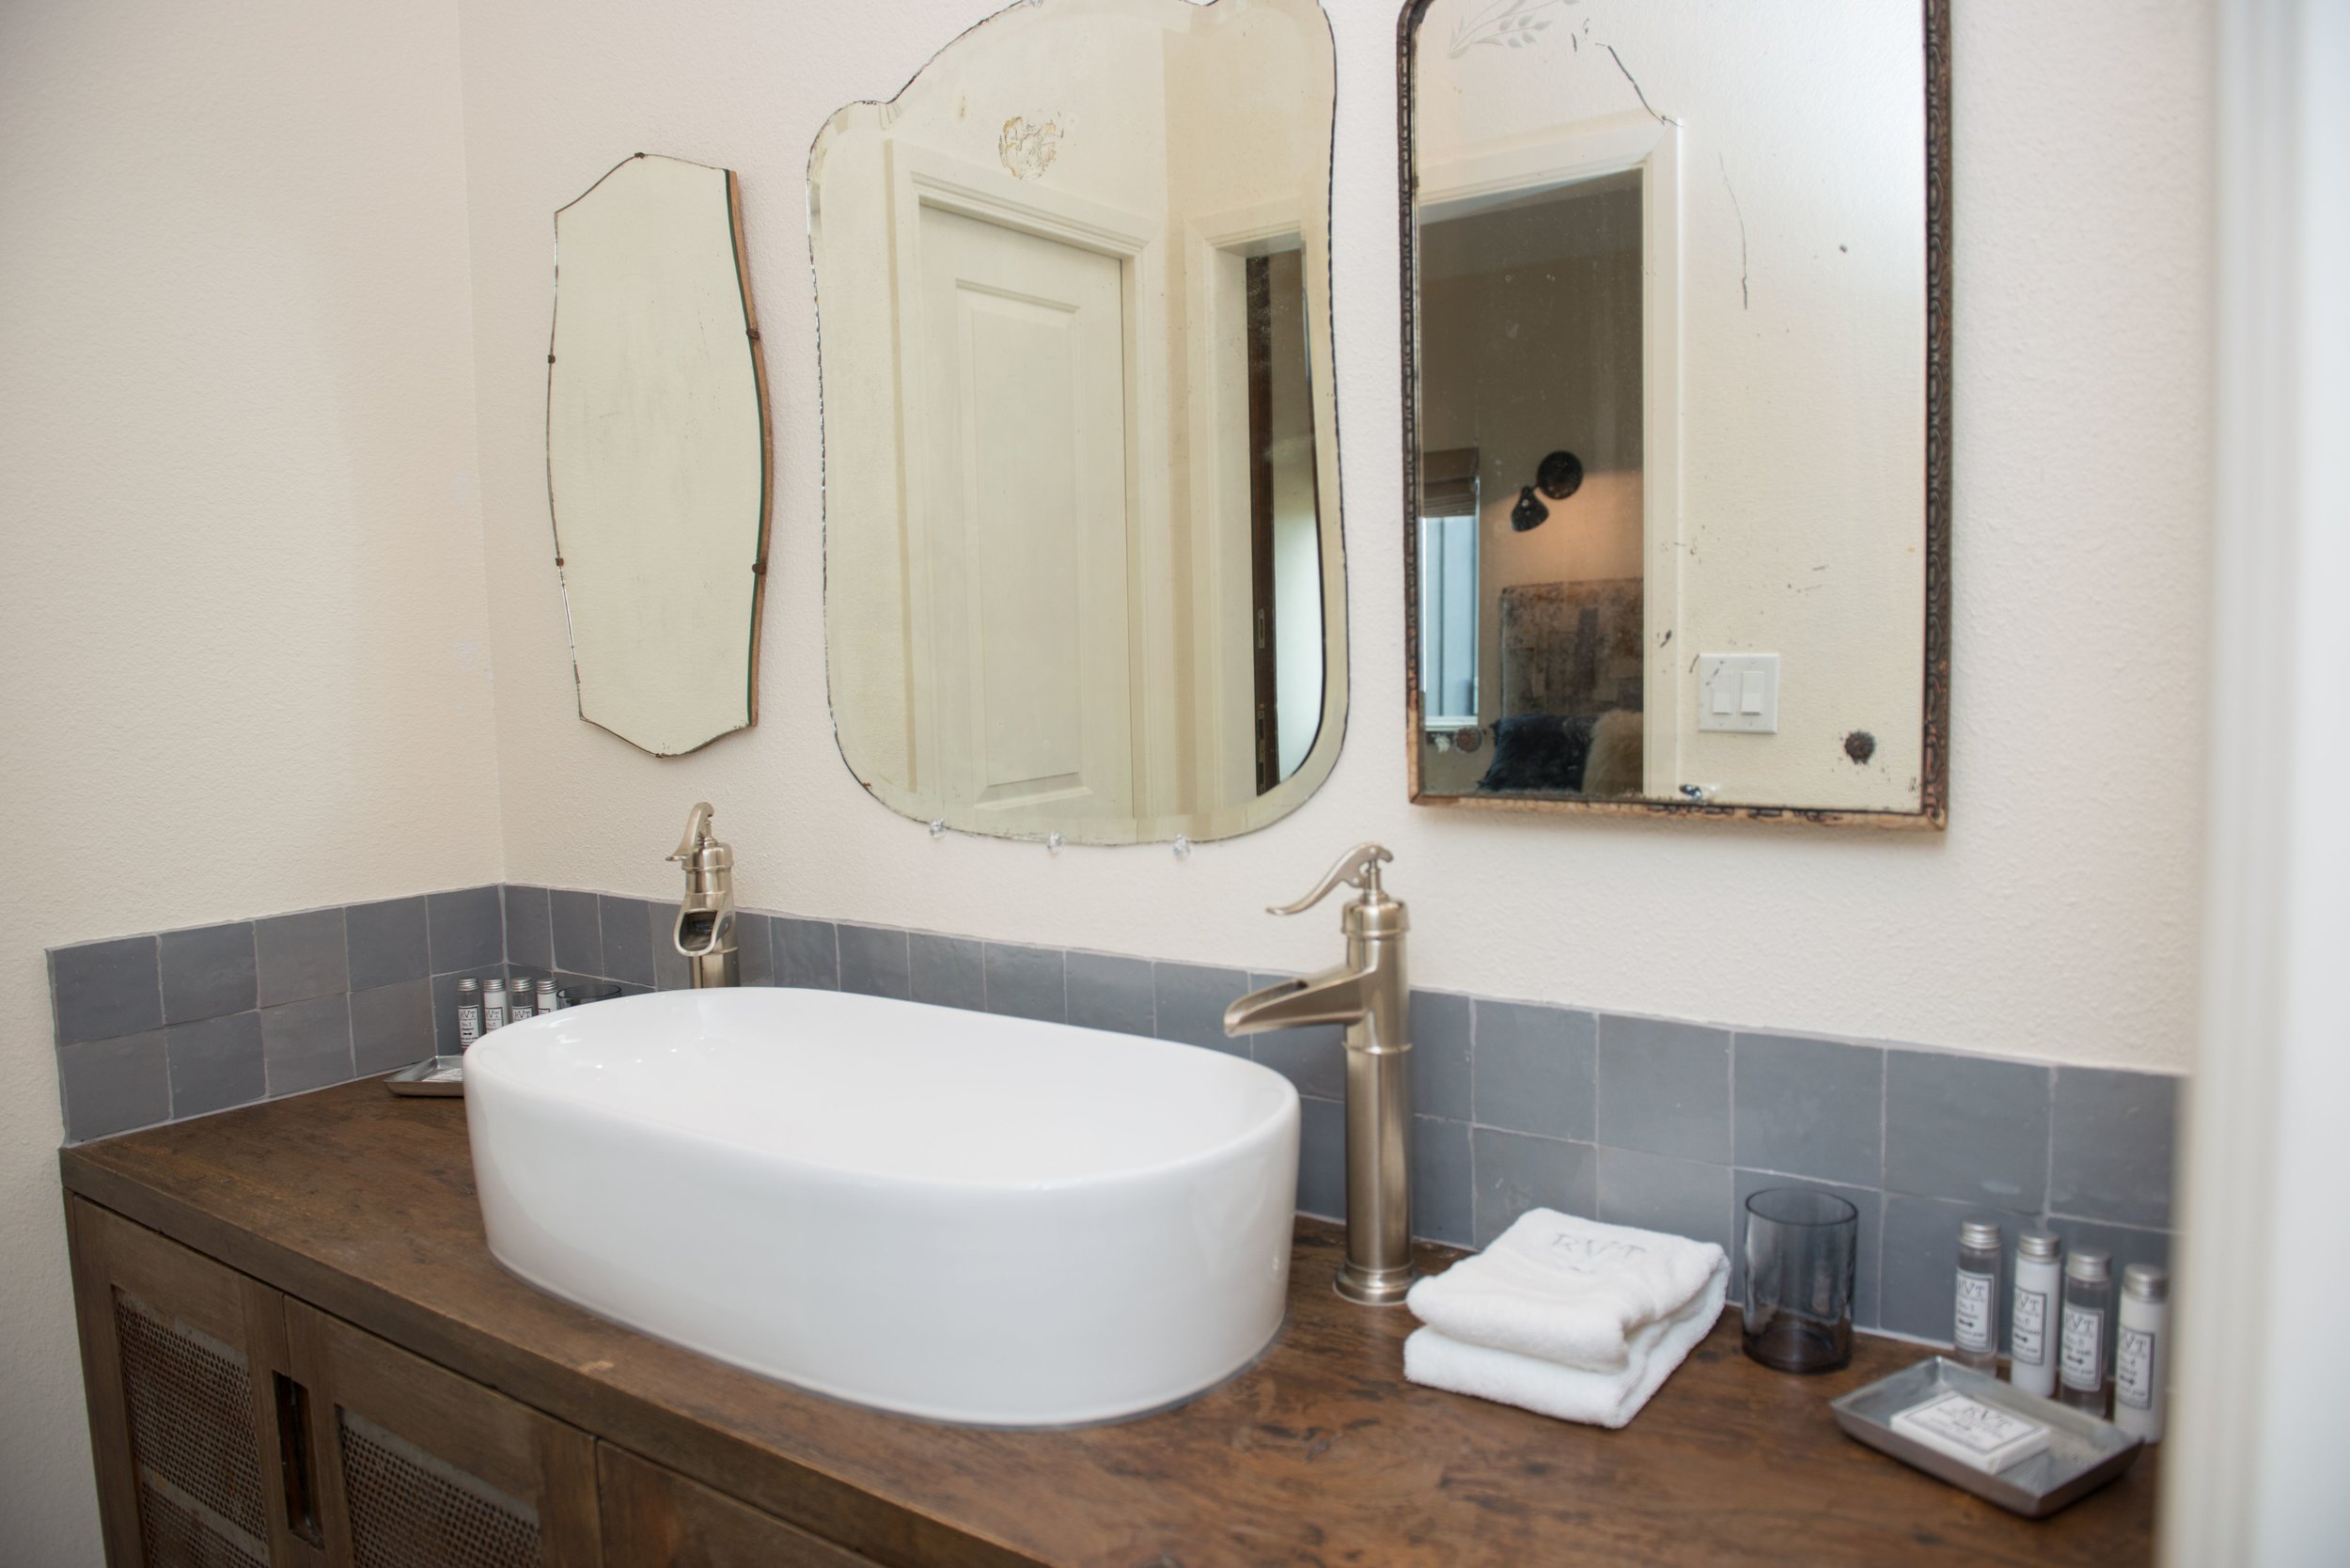   The Boho guest bedroom bath features a soaking tub and shower.  